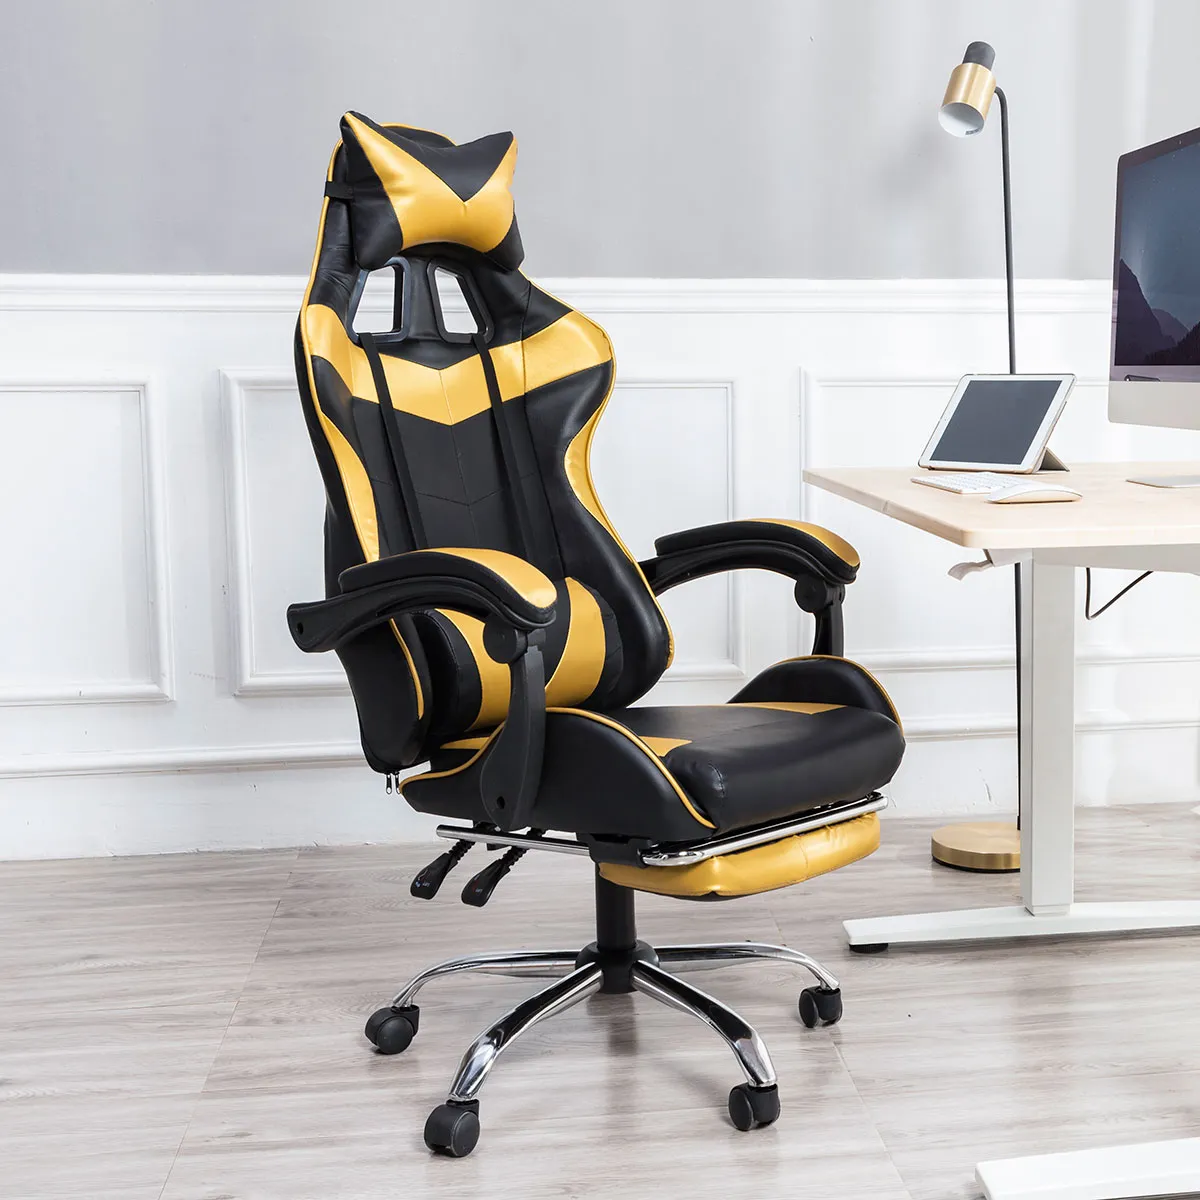 yellow and black coloured recliner, work setup, table, laptop